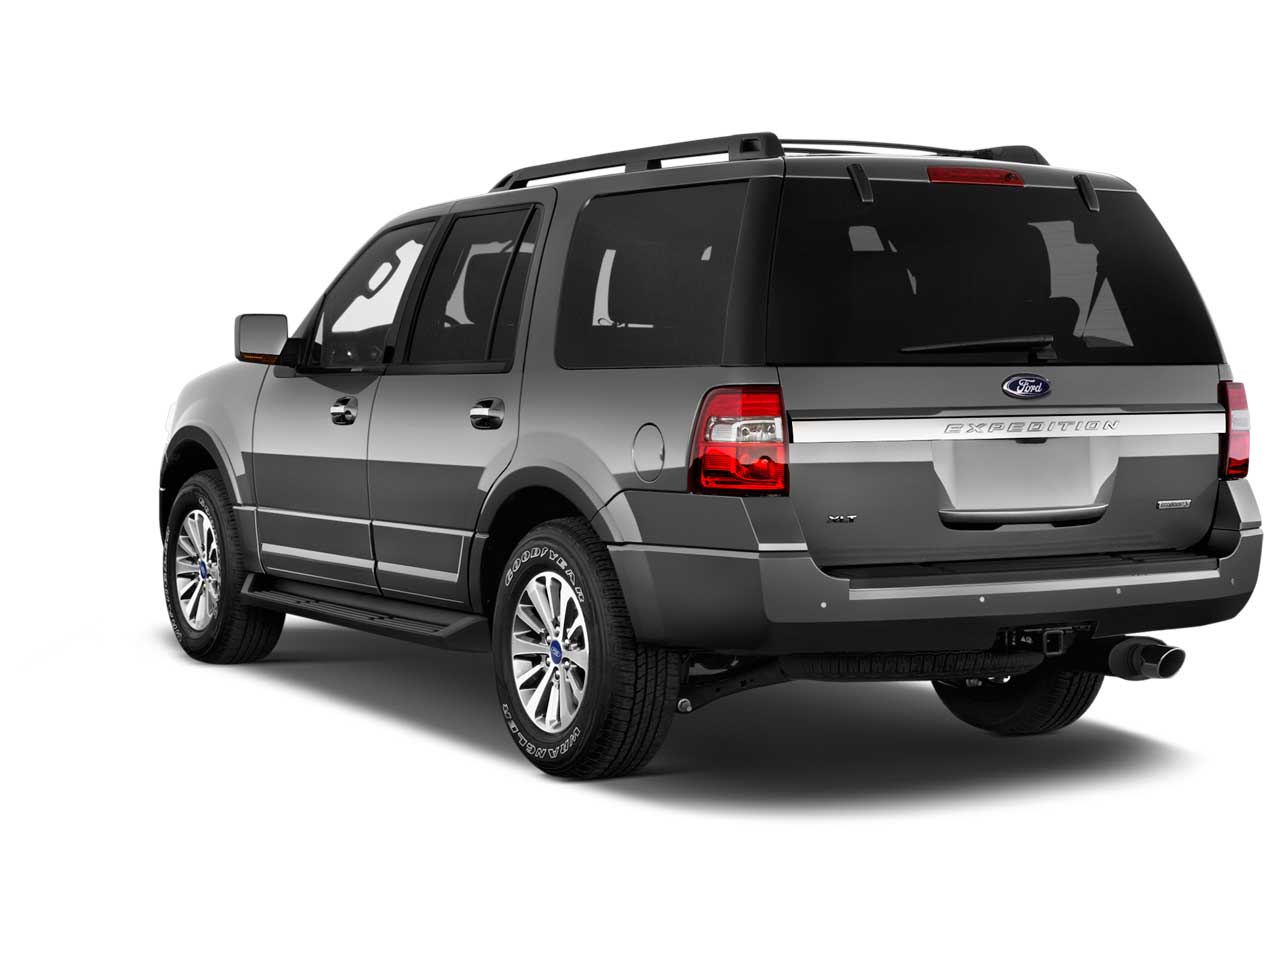 Ford Expedition King Ranch Exterior